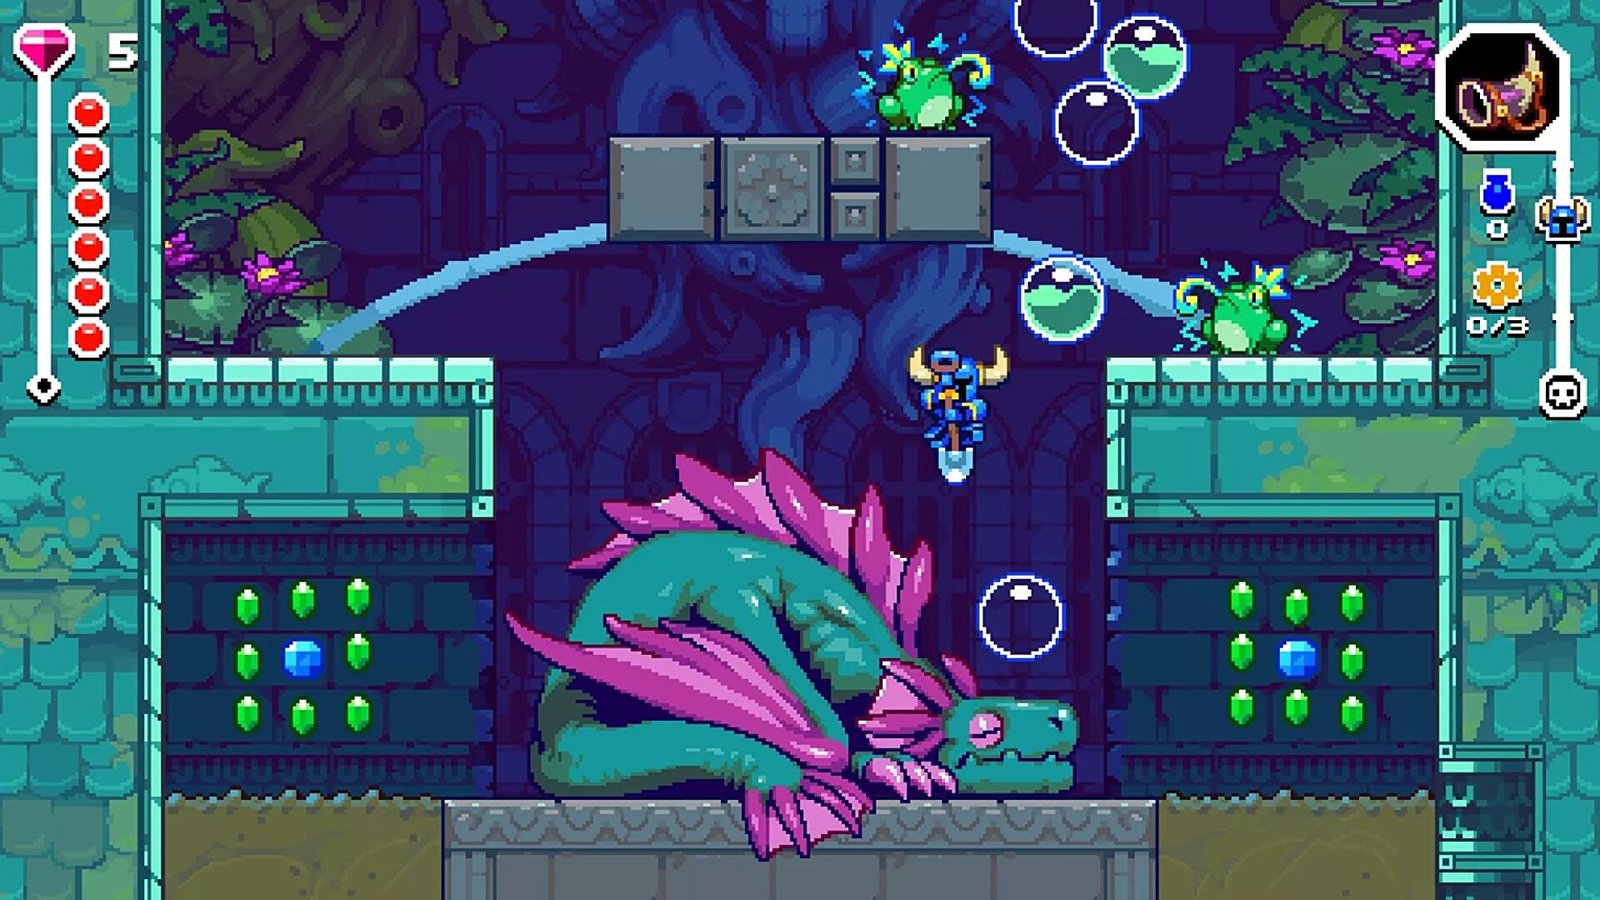 Shovel Knight Dig is a procedurally generated platformer rocking up on Steam in September